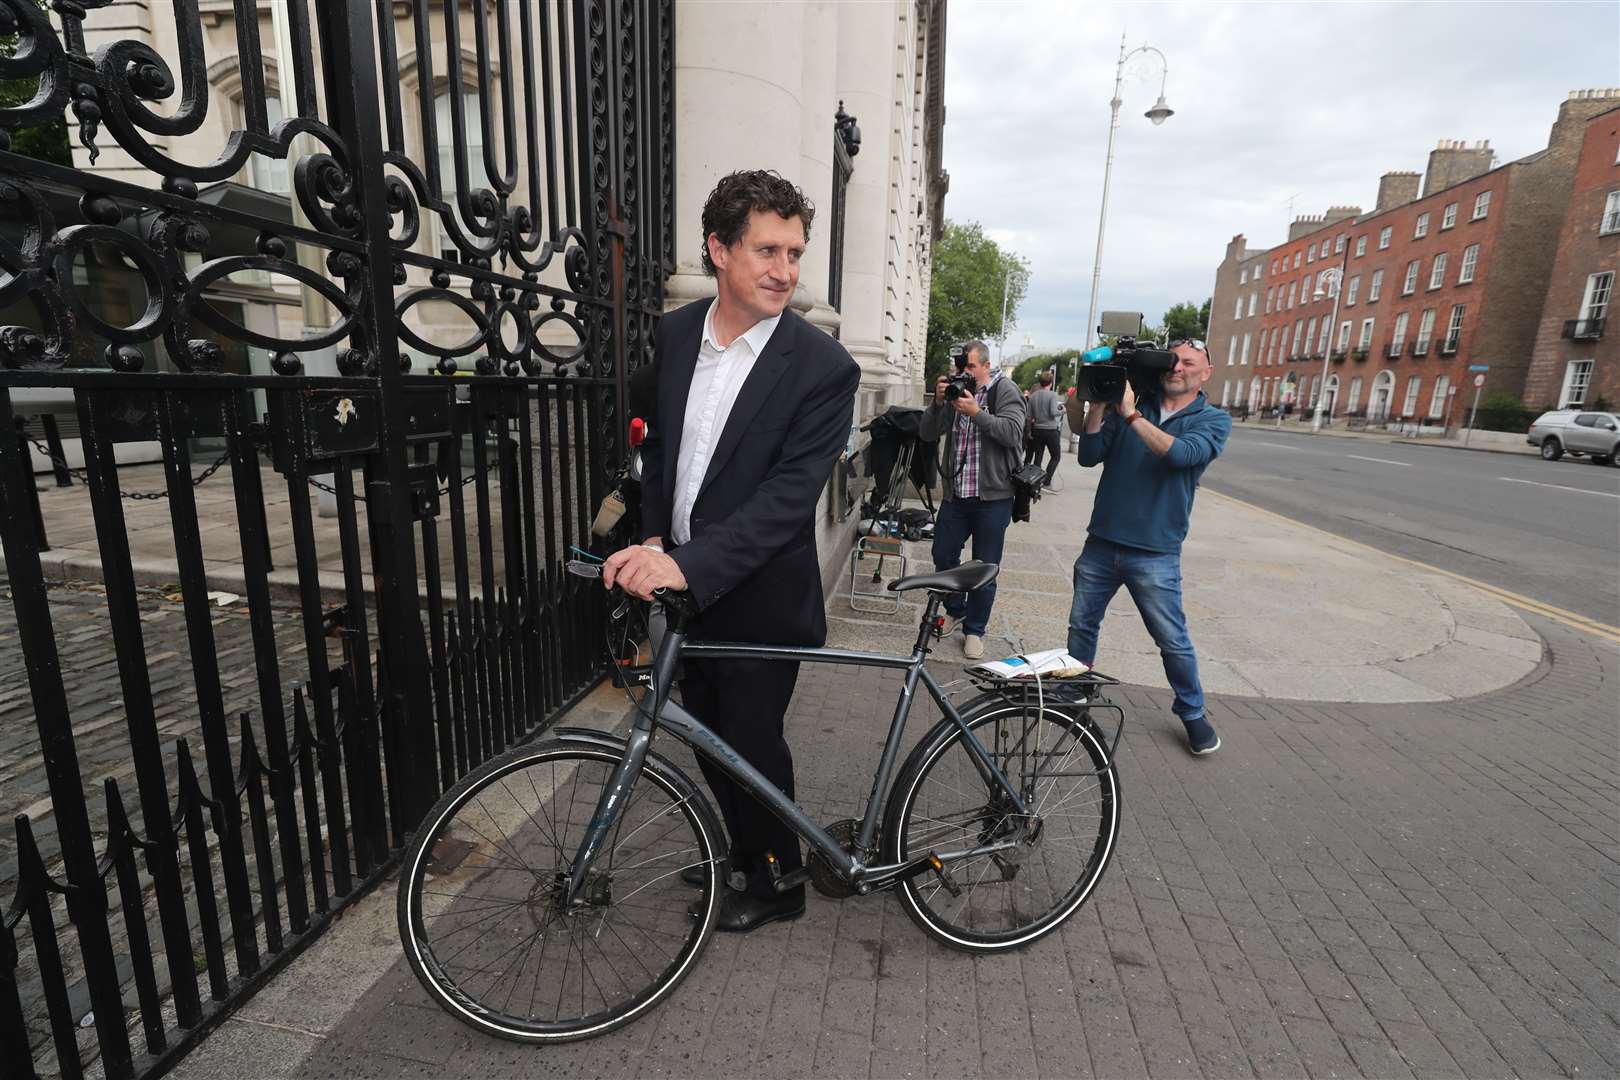 Green Party leader Eamon Ryan at Government Buildings in Dublin (Niall Carson/PA)